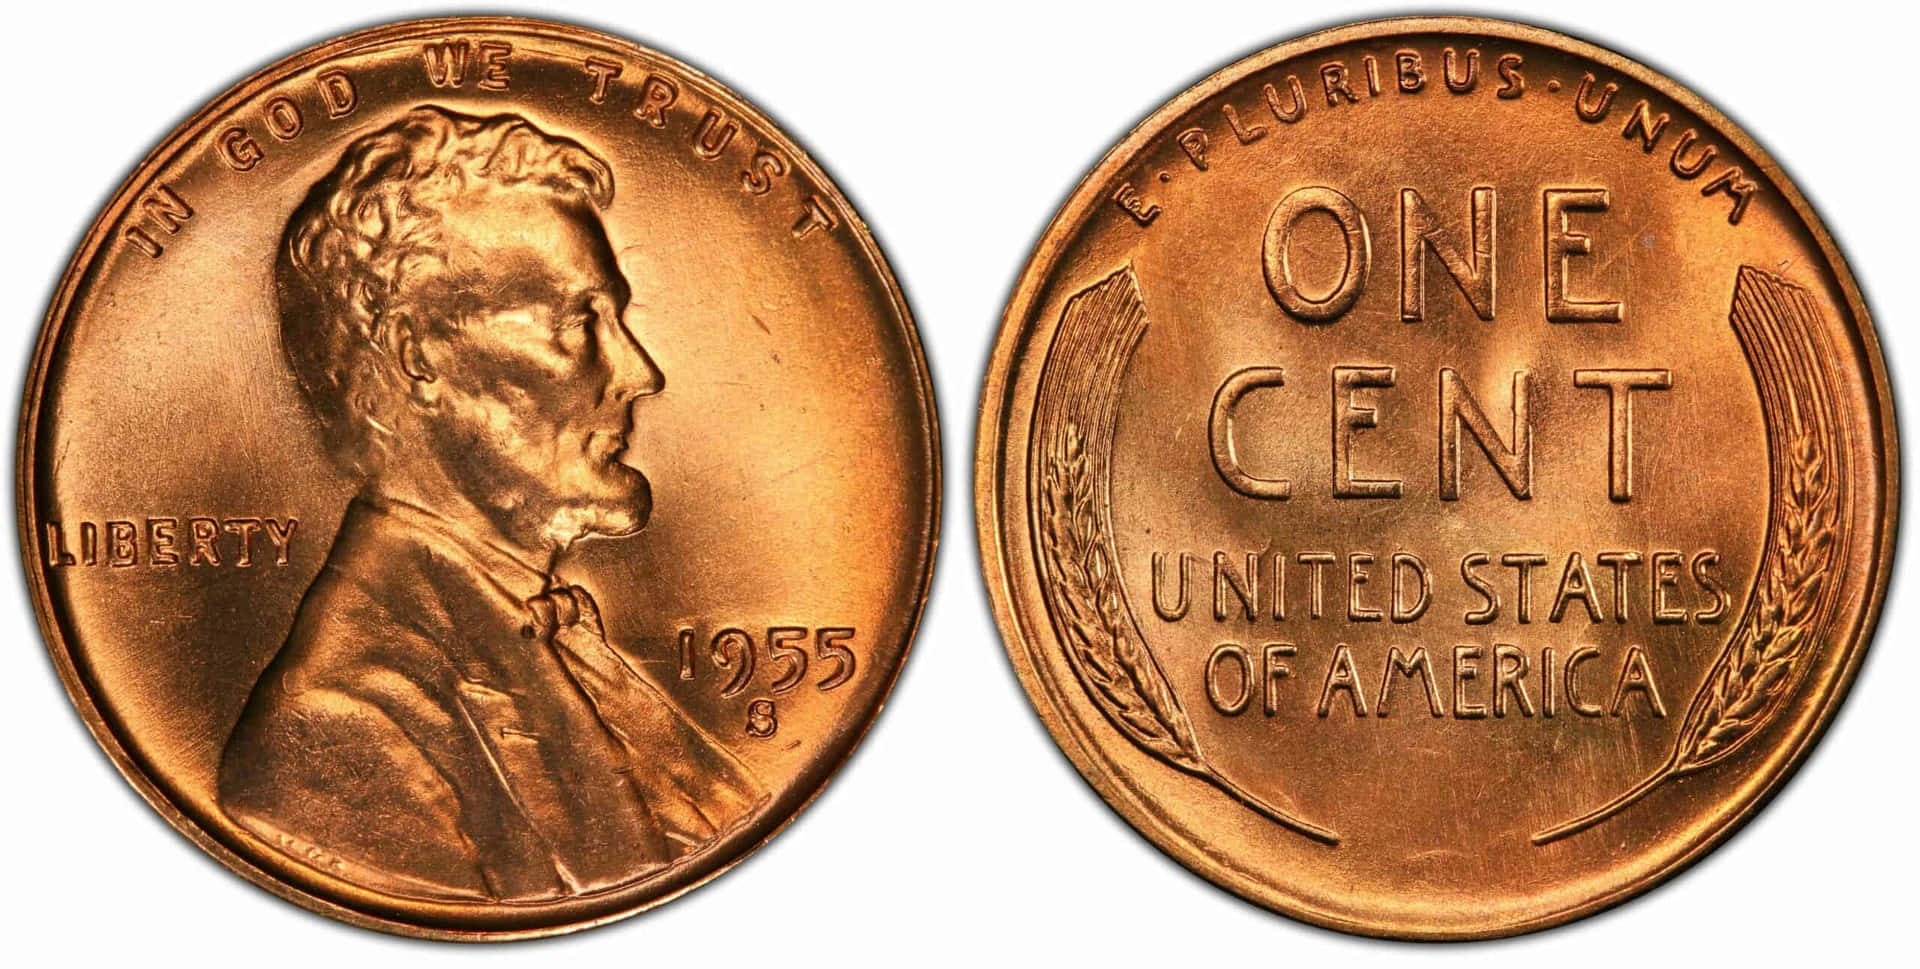 Lincoln Cent - Pgs - Pgs - Pgs - Pgs -